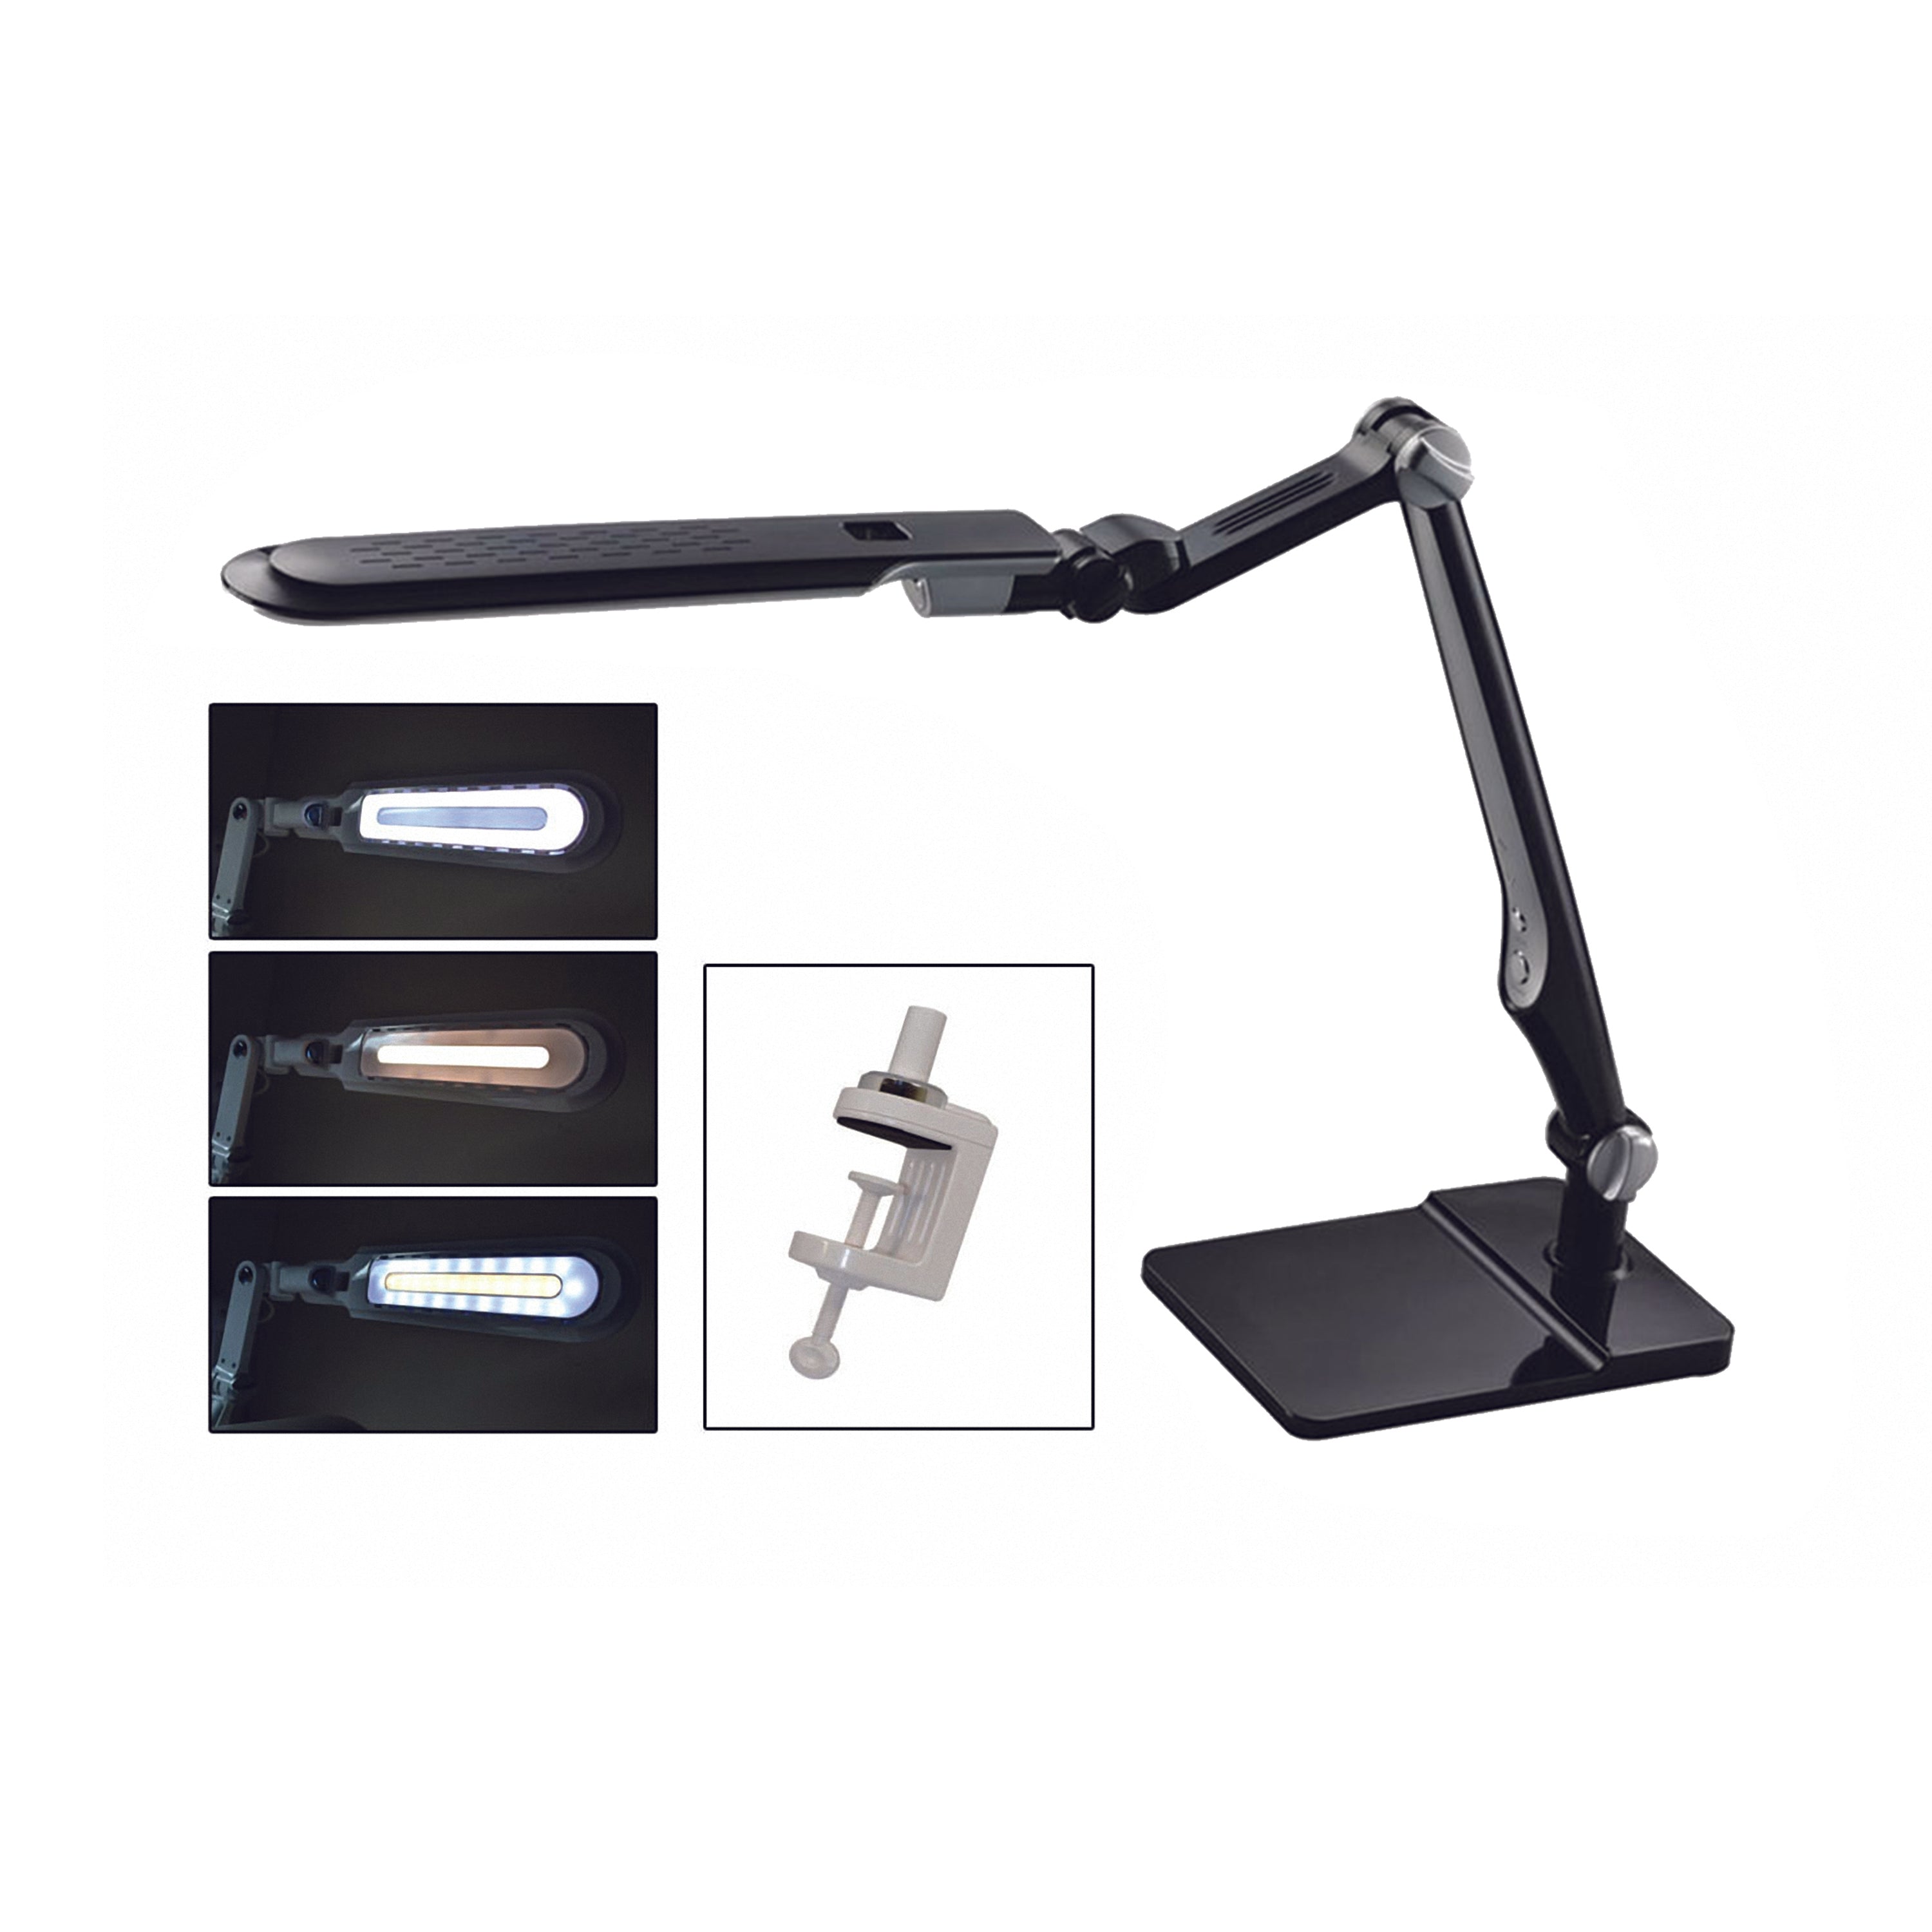 Black LED Lamp with Double-Reach Clamp